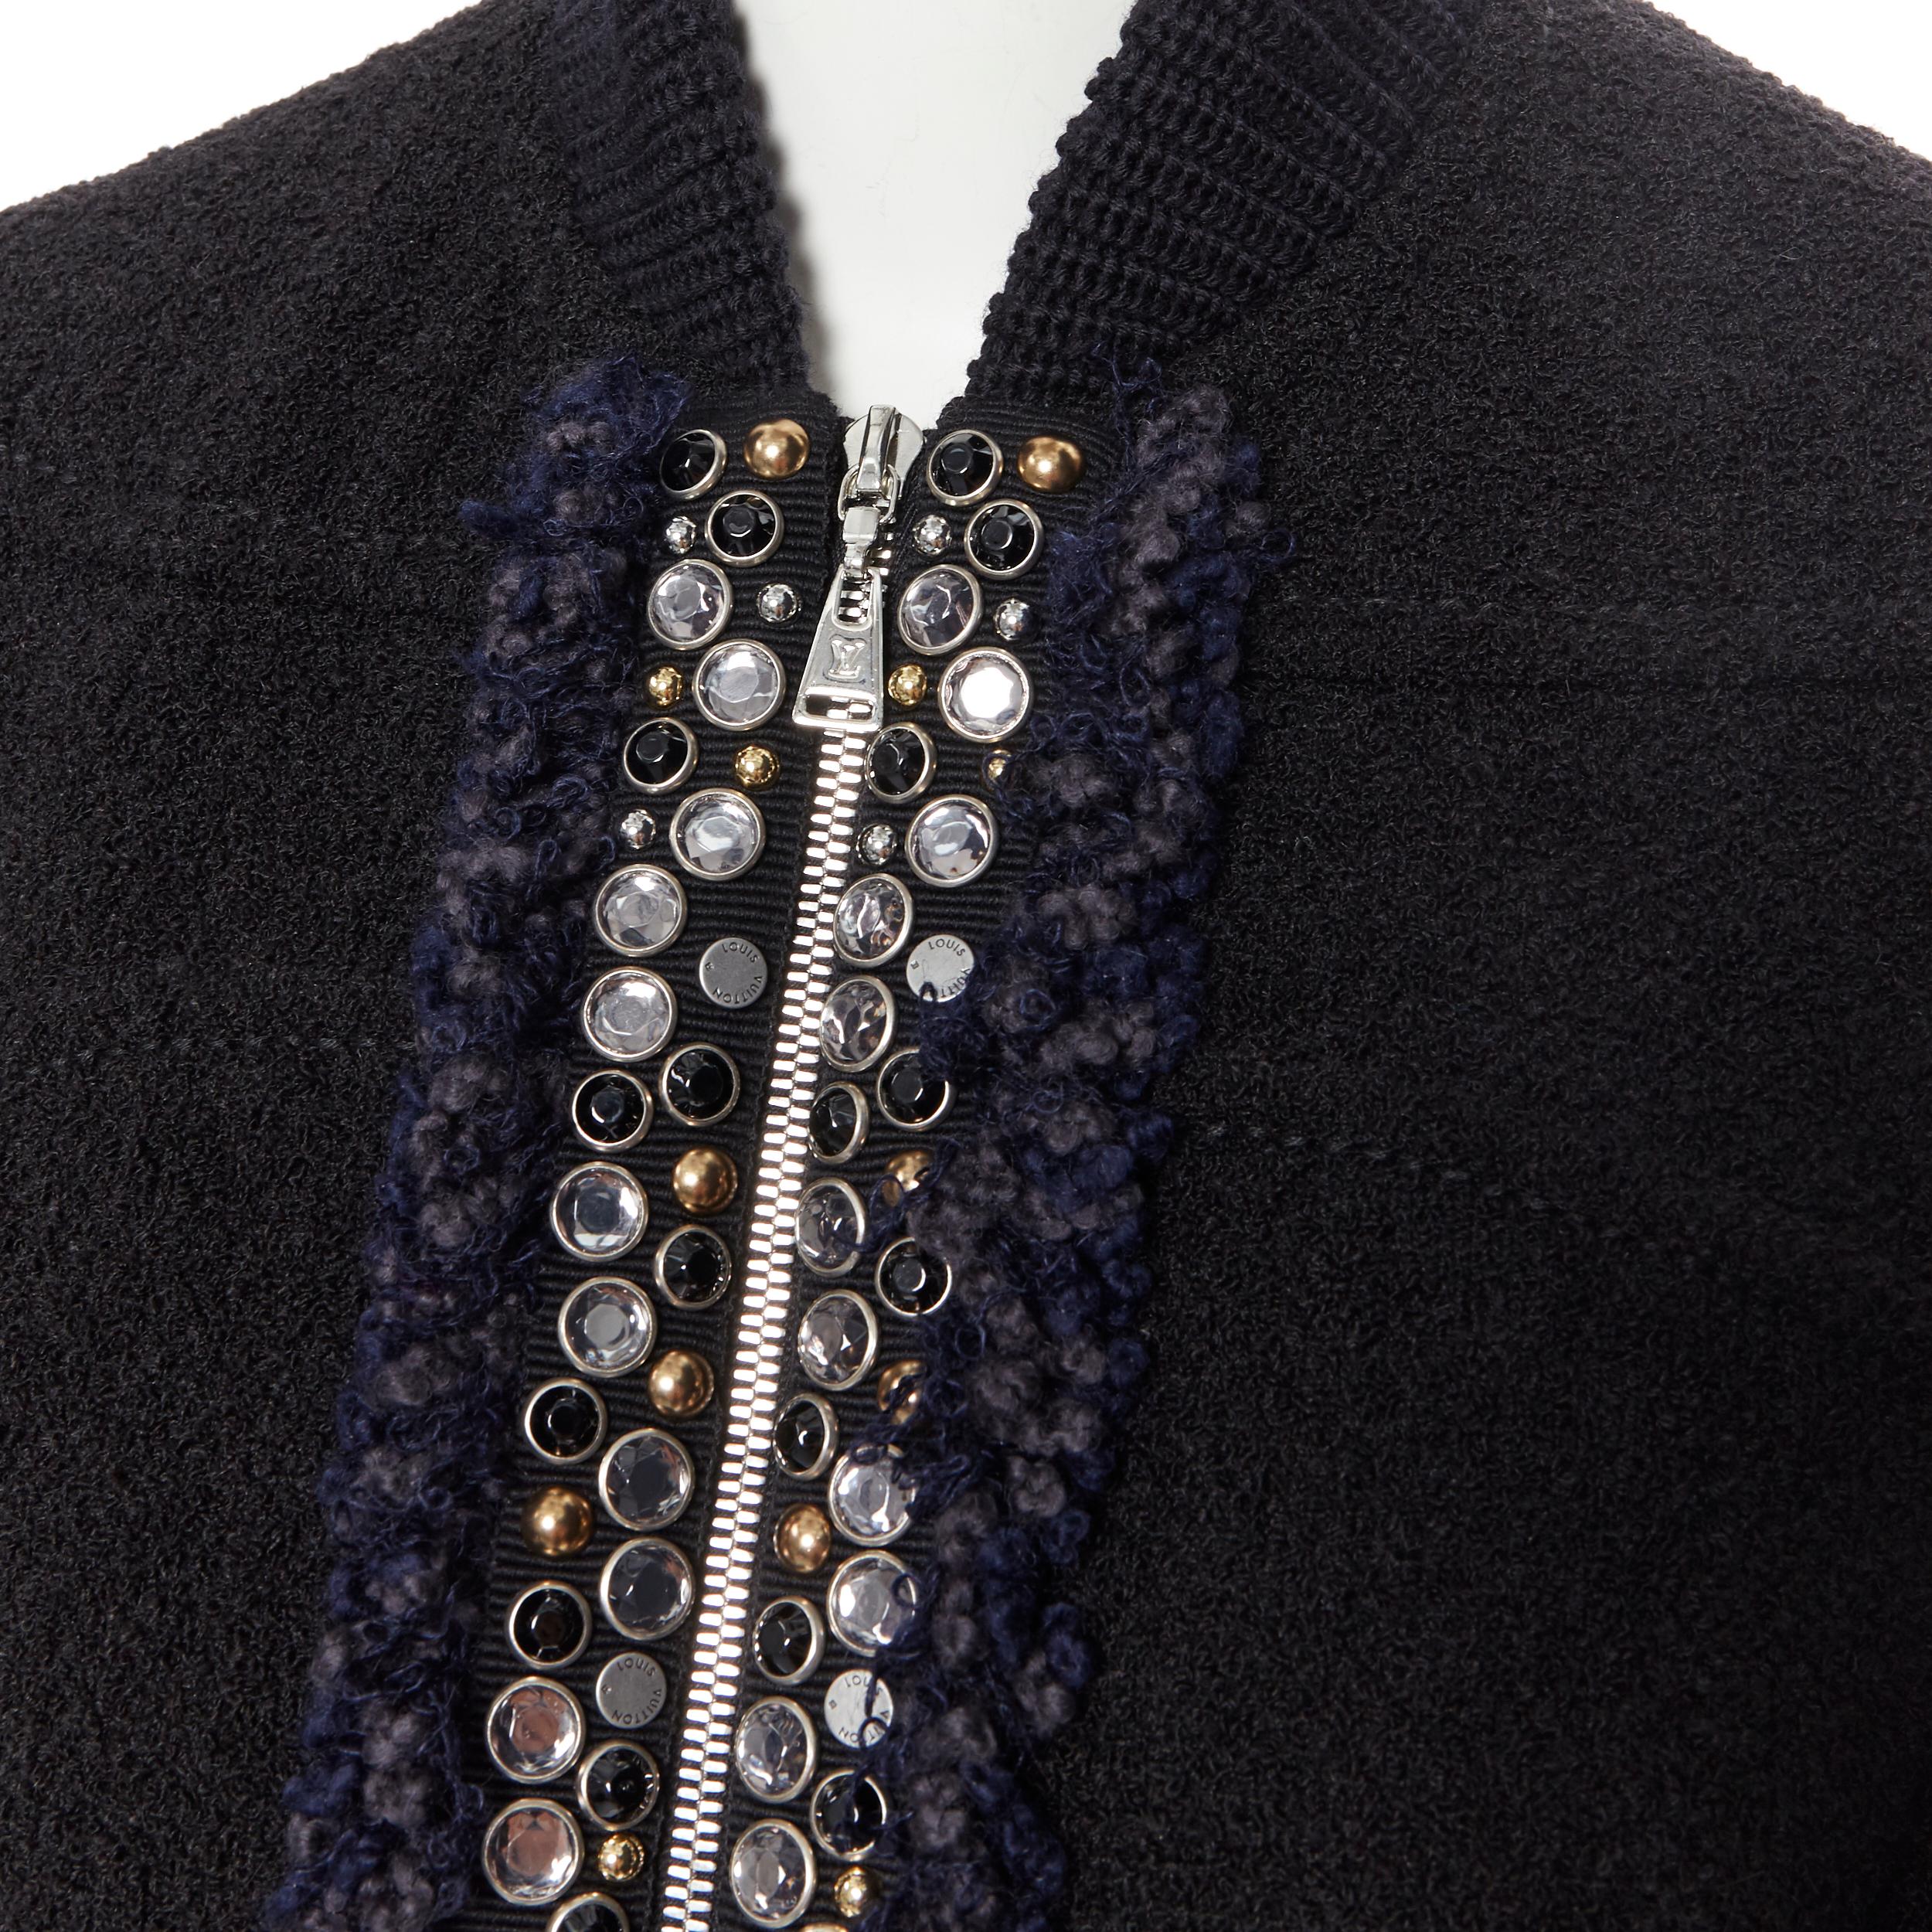 runway LOUIS VUITTON black boucle jewel stud embellished cocoon cape coat FR36
Brand: Louis Vuitton
Designer: Nicolas Ghesquiere
Model Name / Style: Cocoon coat
Material: Wool blend
Color: Black
Pattern: Solid
Closure: Zip
Extra Detail: Printed